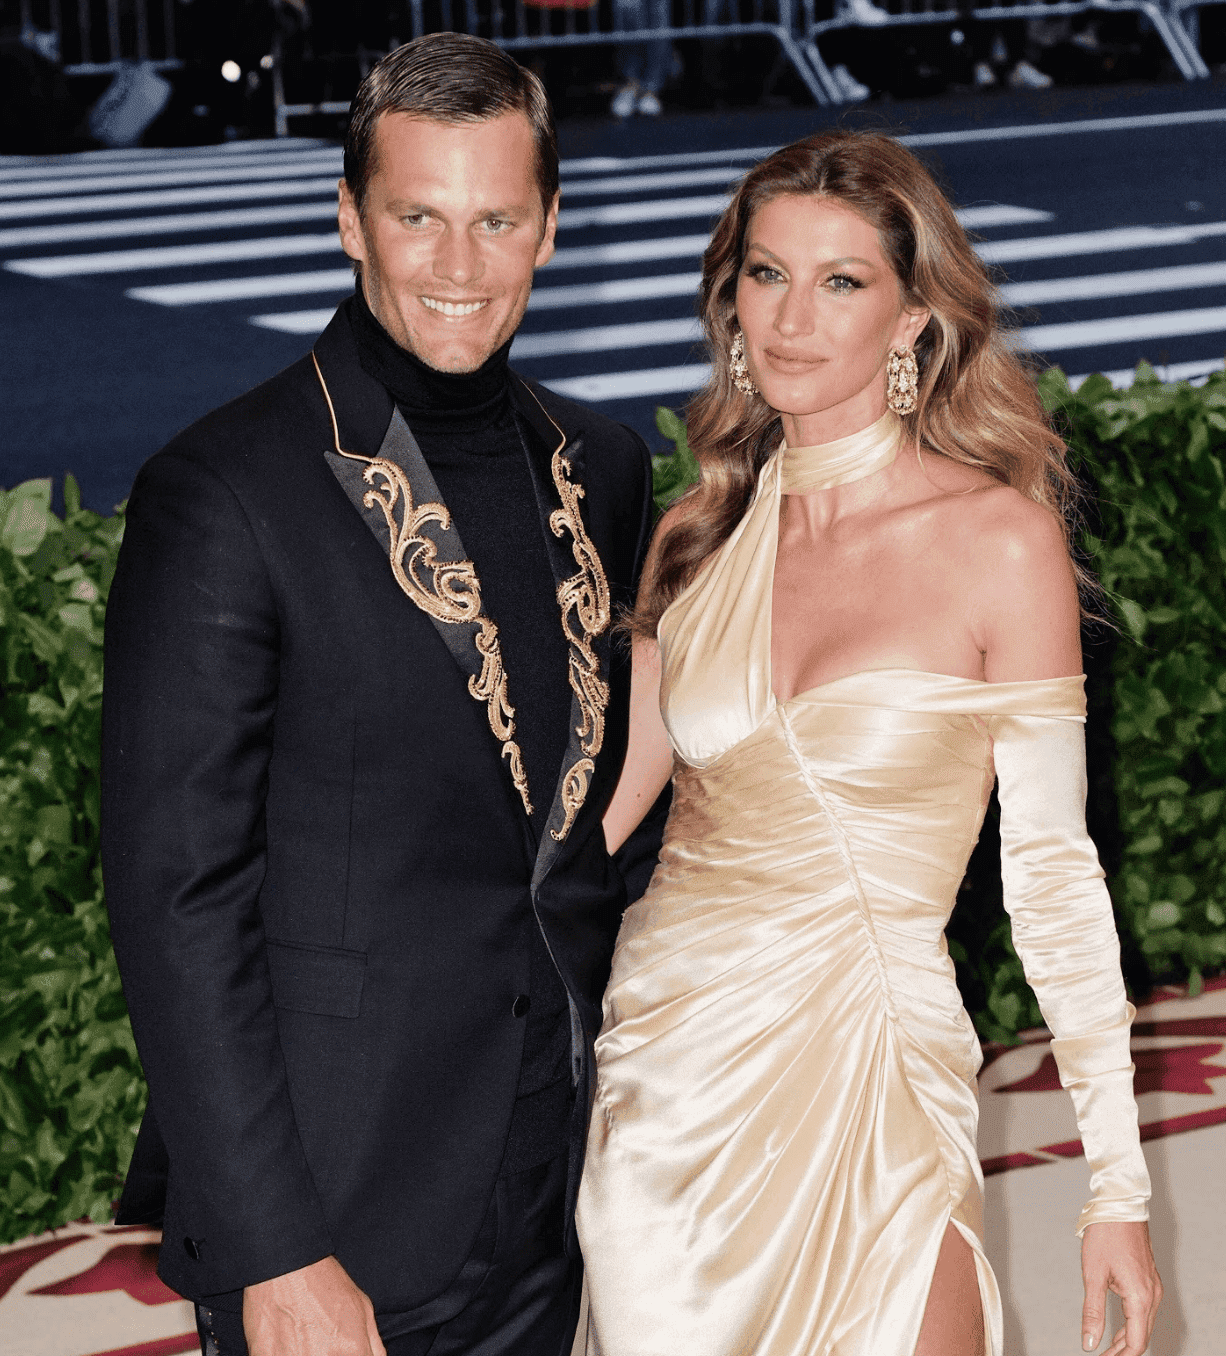 Tom Brady and Gisele Bündchen at the Heavenly Bodies: Fashion & The Catholic Imagination Costume Institute Gala on May 7, 2018. | Source: Getty Images